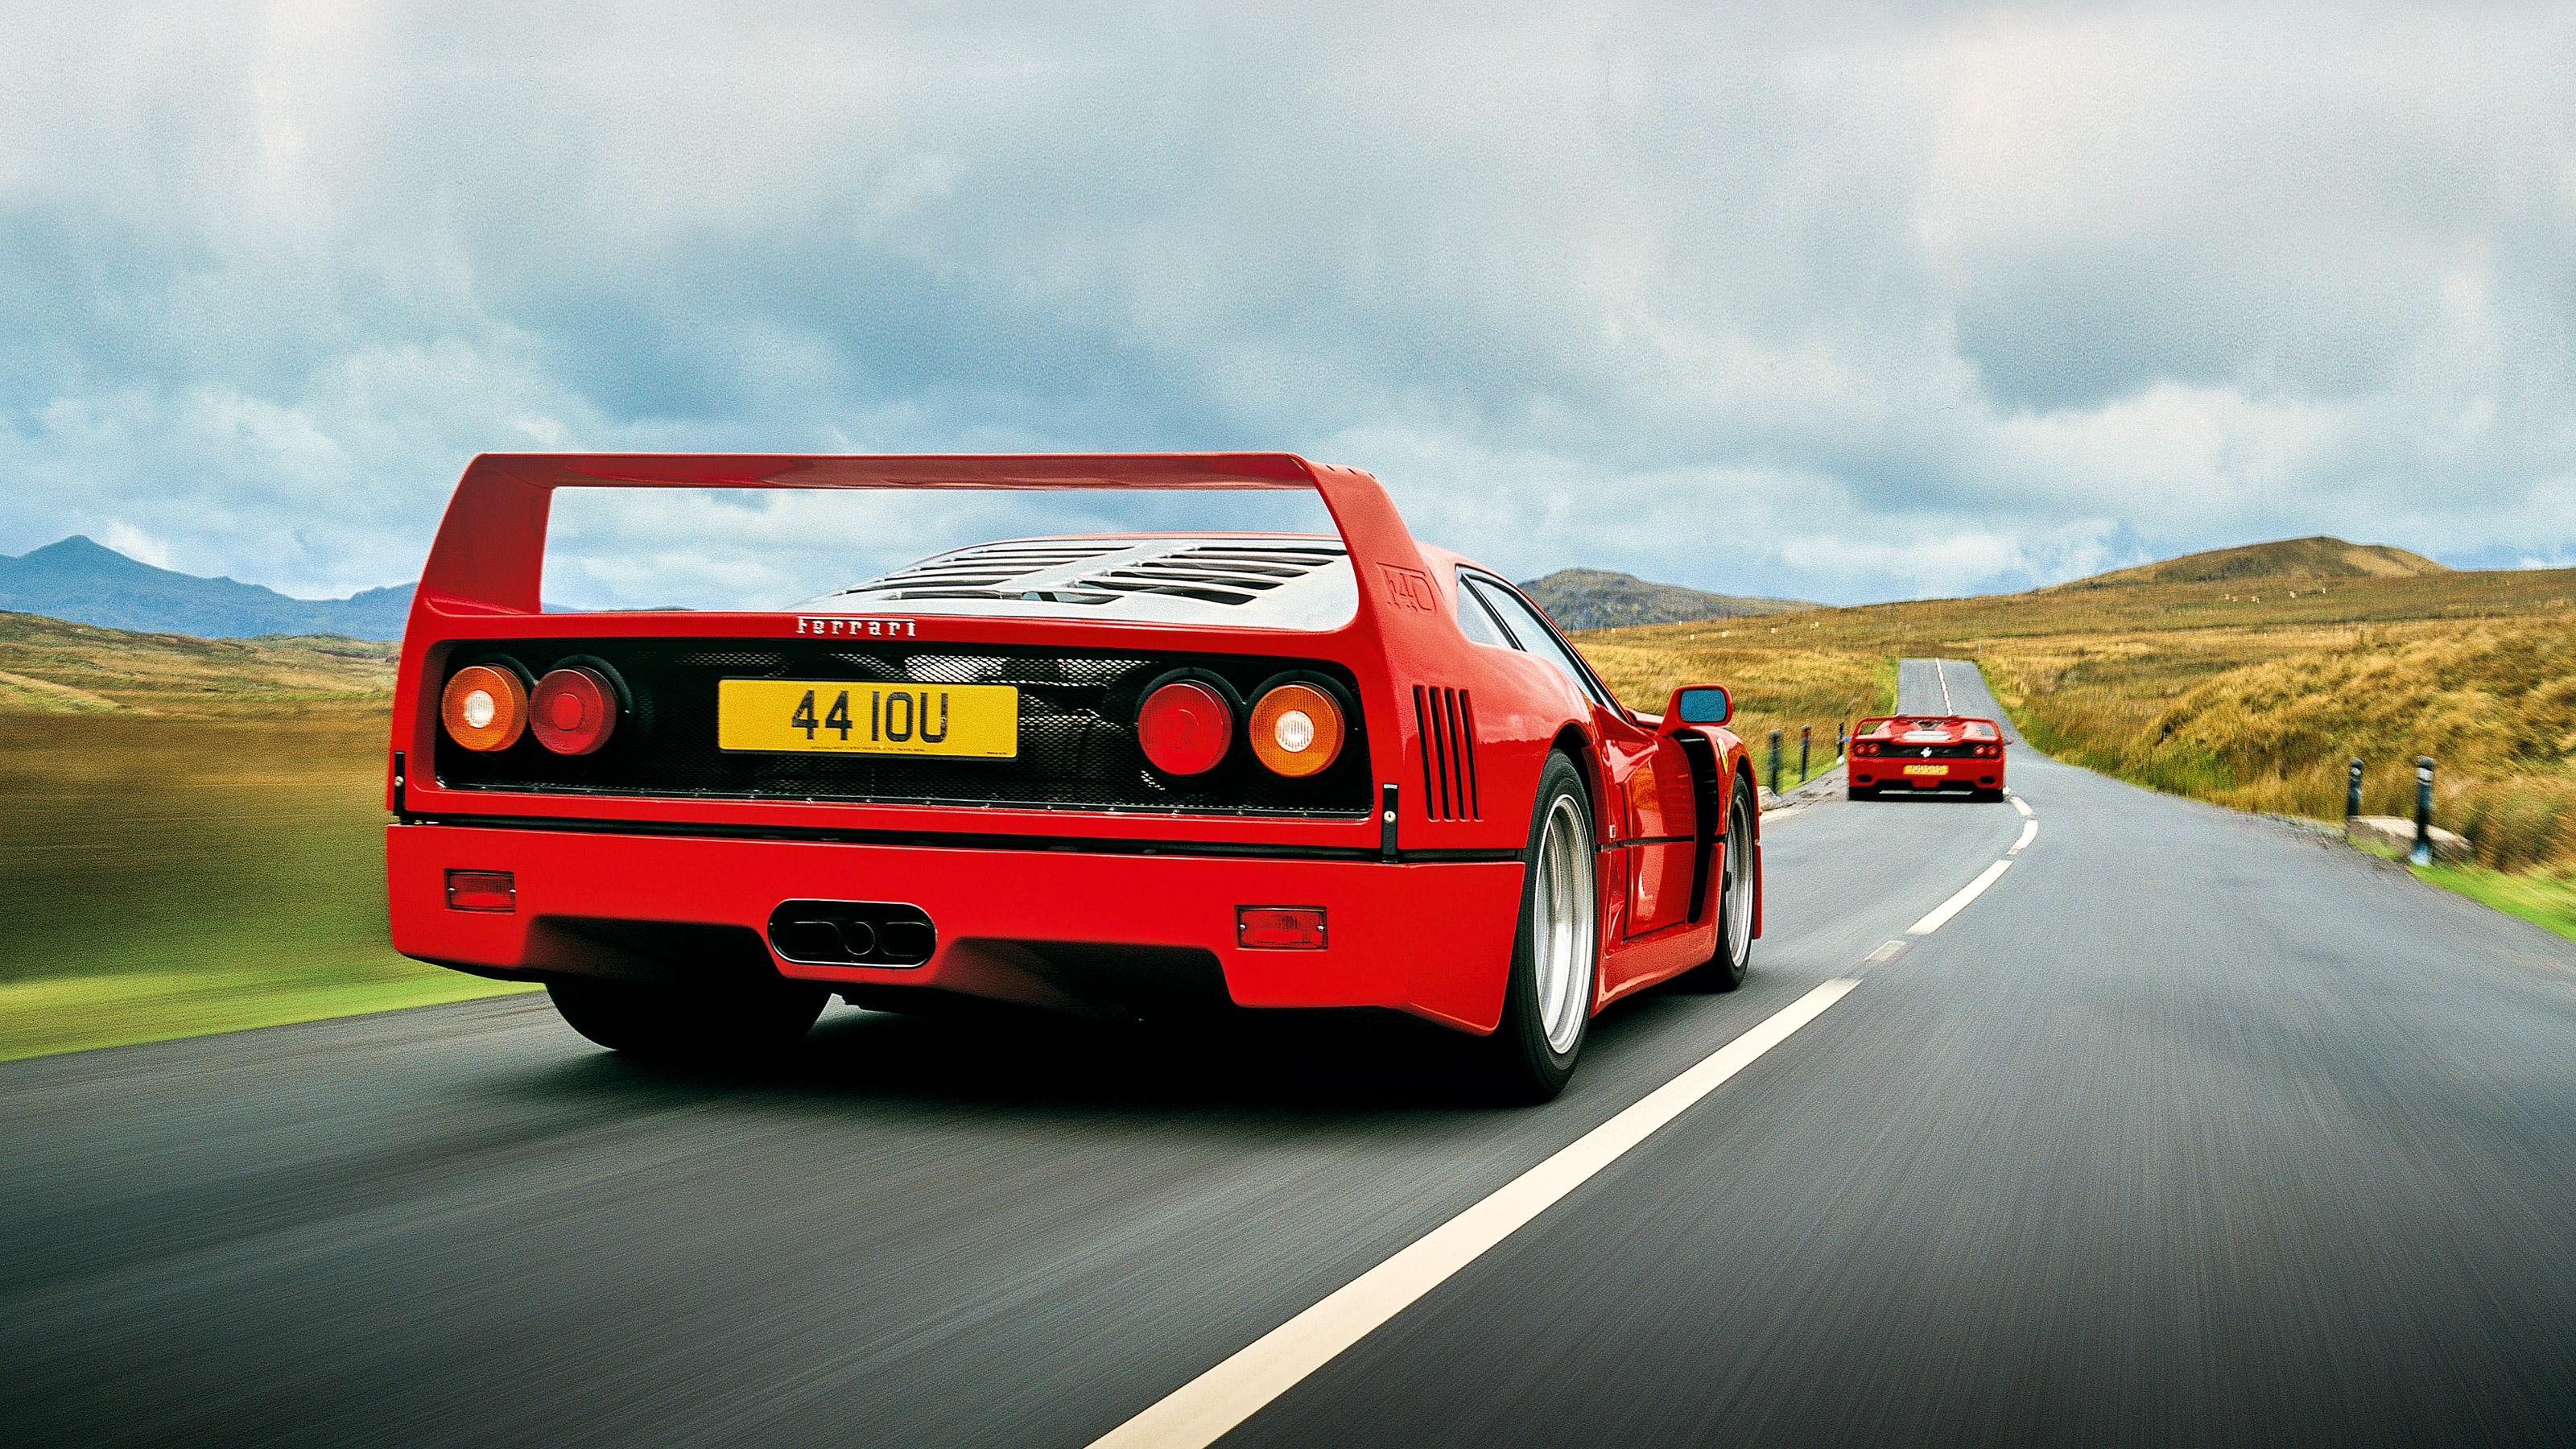 Ferrari's hypercars: 288 GTO, F40, F50 and Enzo driven back-to-back